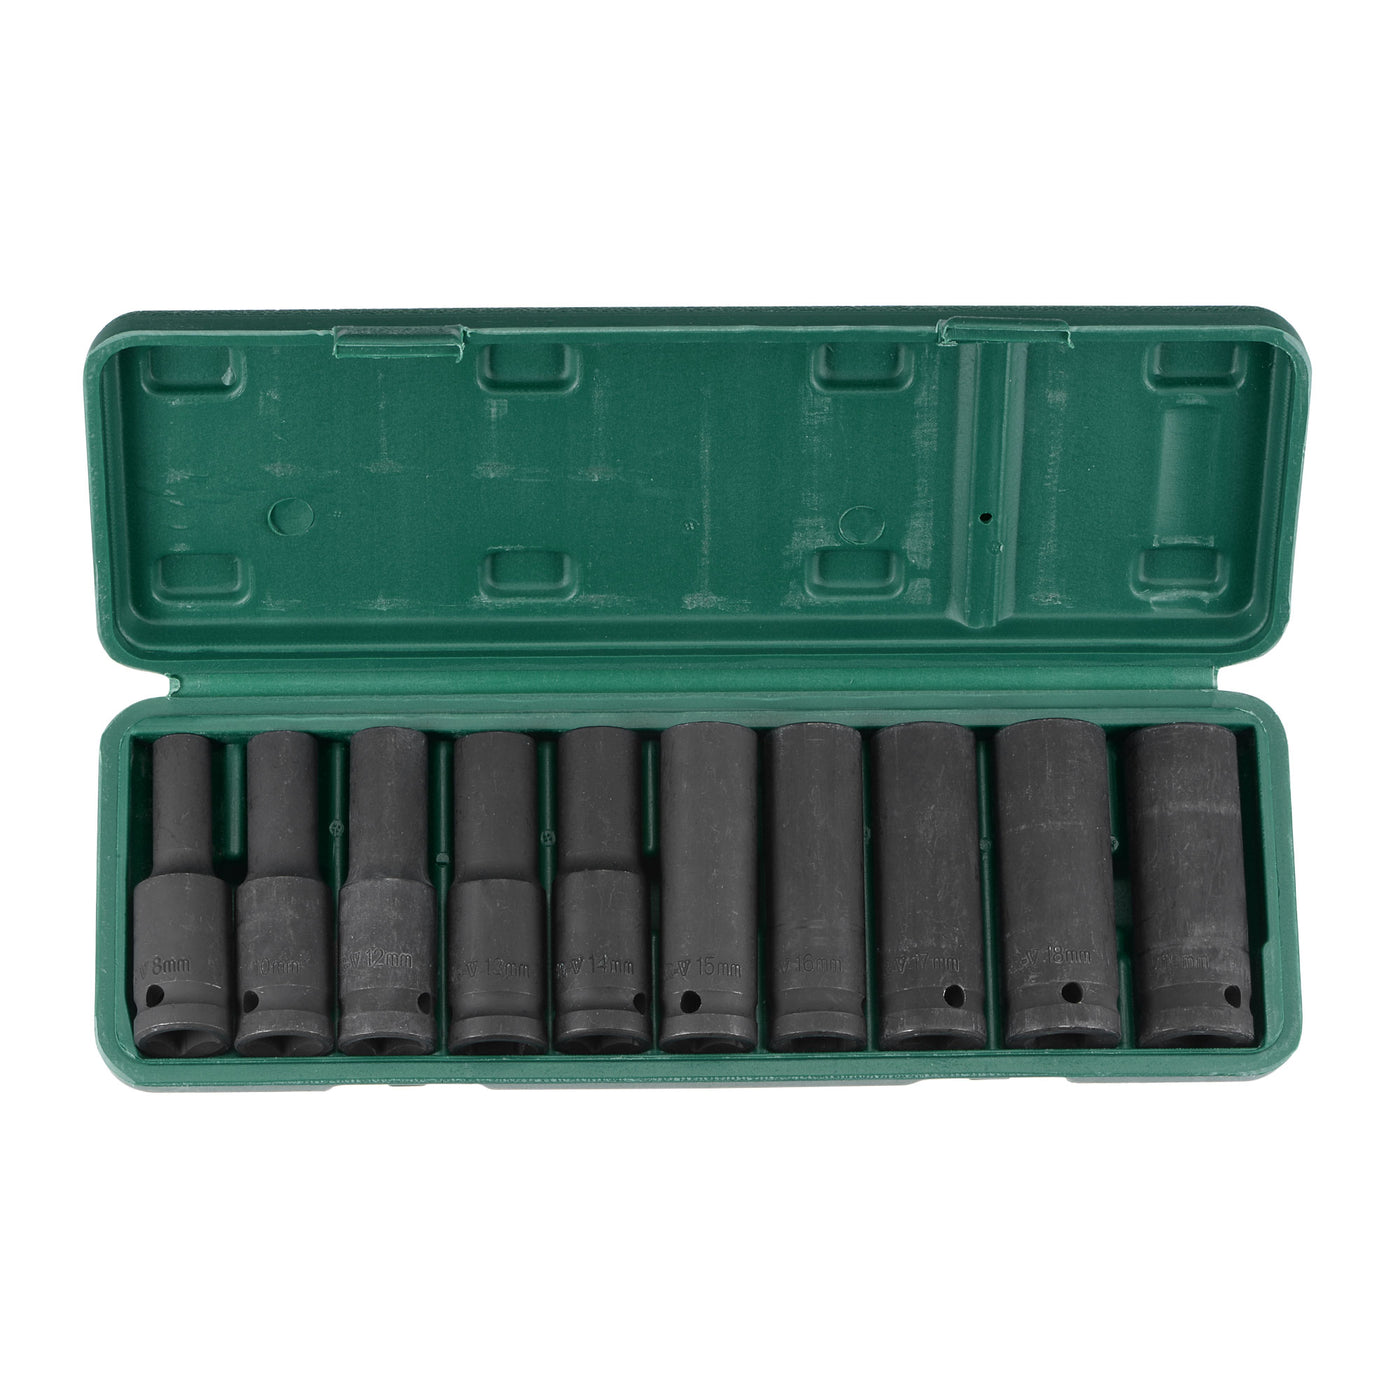 uxcell Uxcell 1/2-Inch Drive Deep 6-Point Impact Socket Set, Metric, CR-MO, 10-Piece (8mm - 19mm)